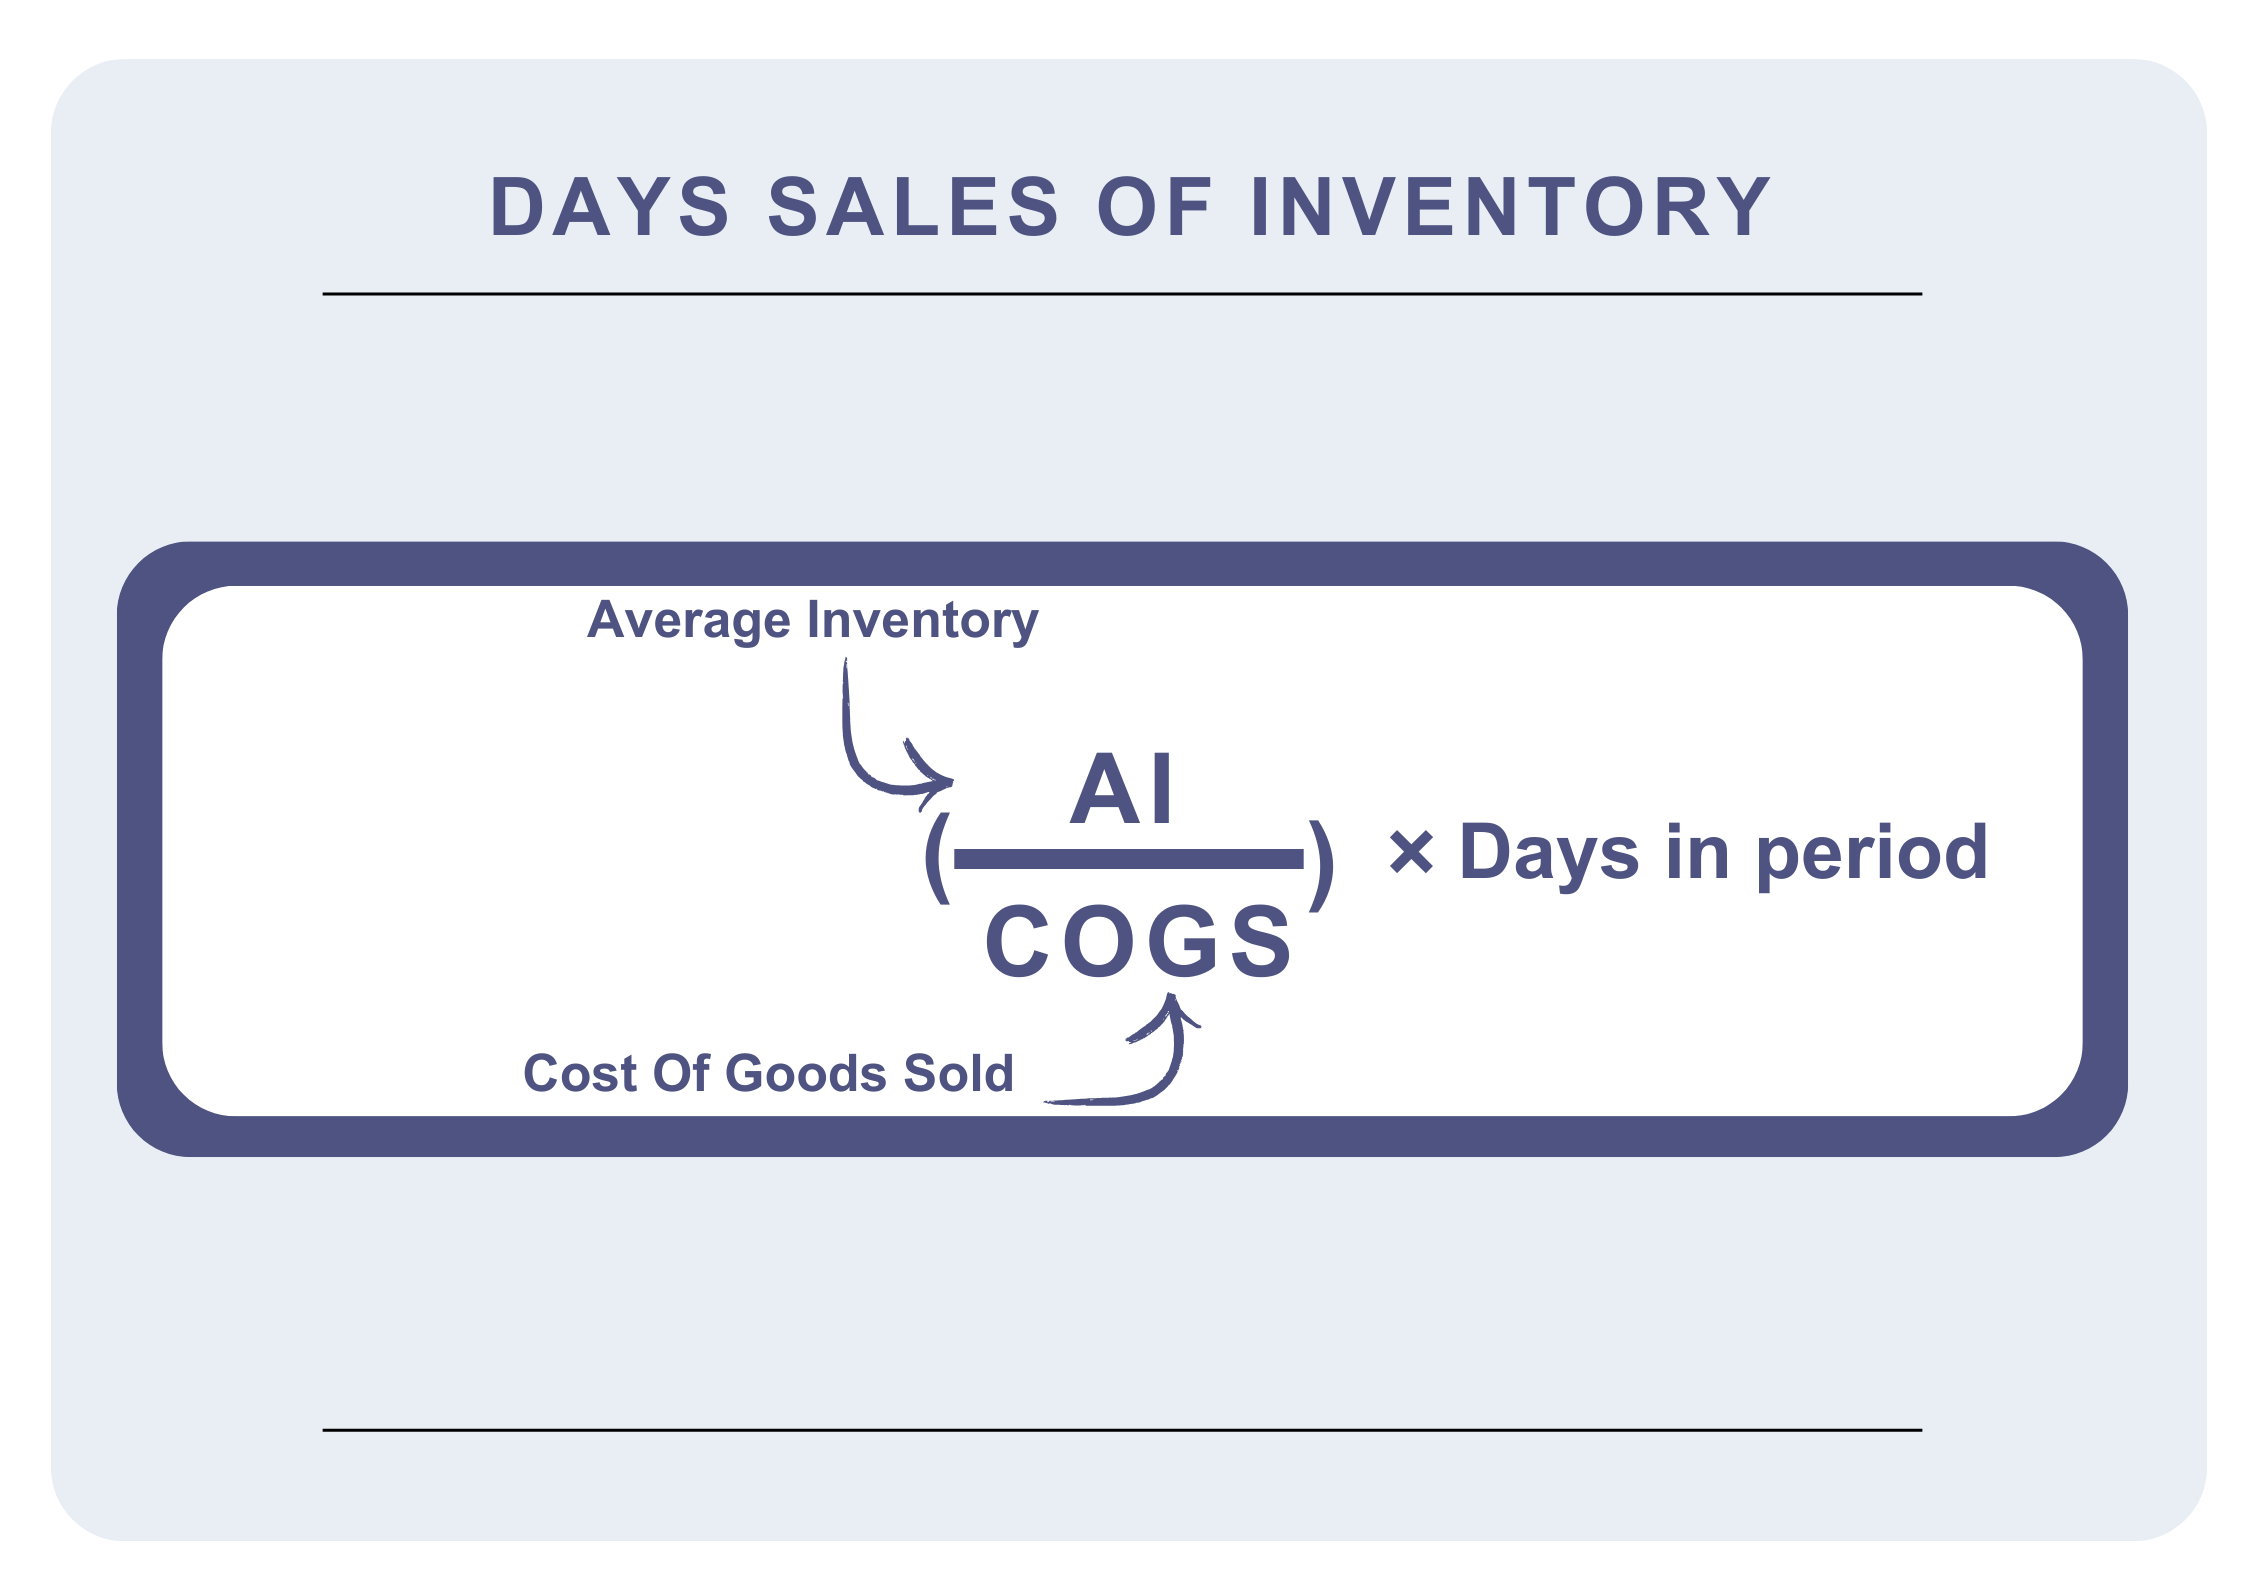 Days Sales of Inventory